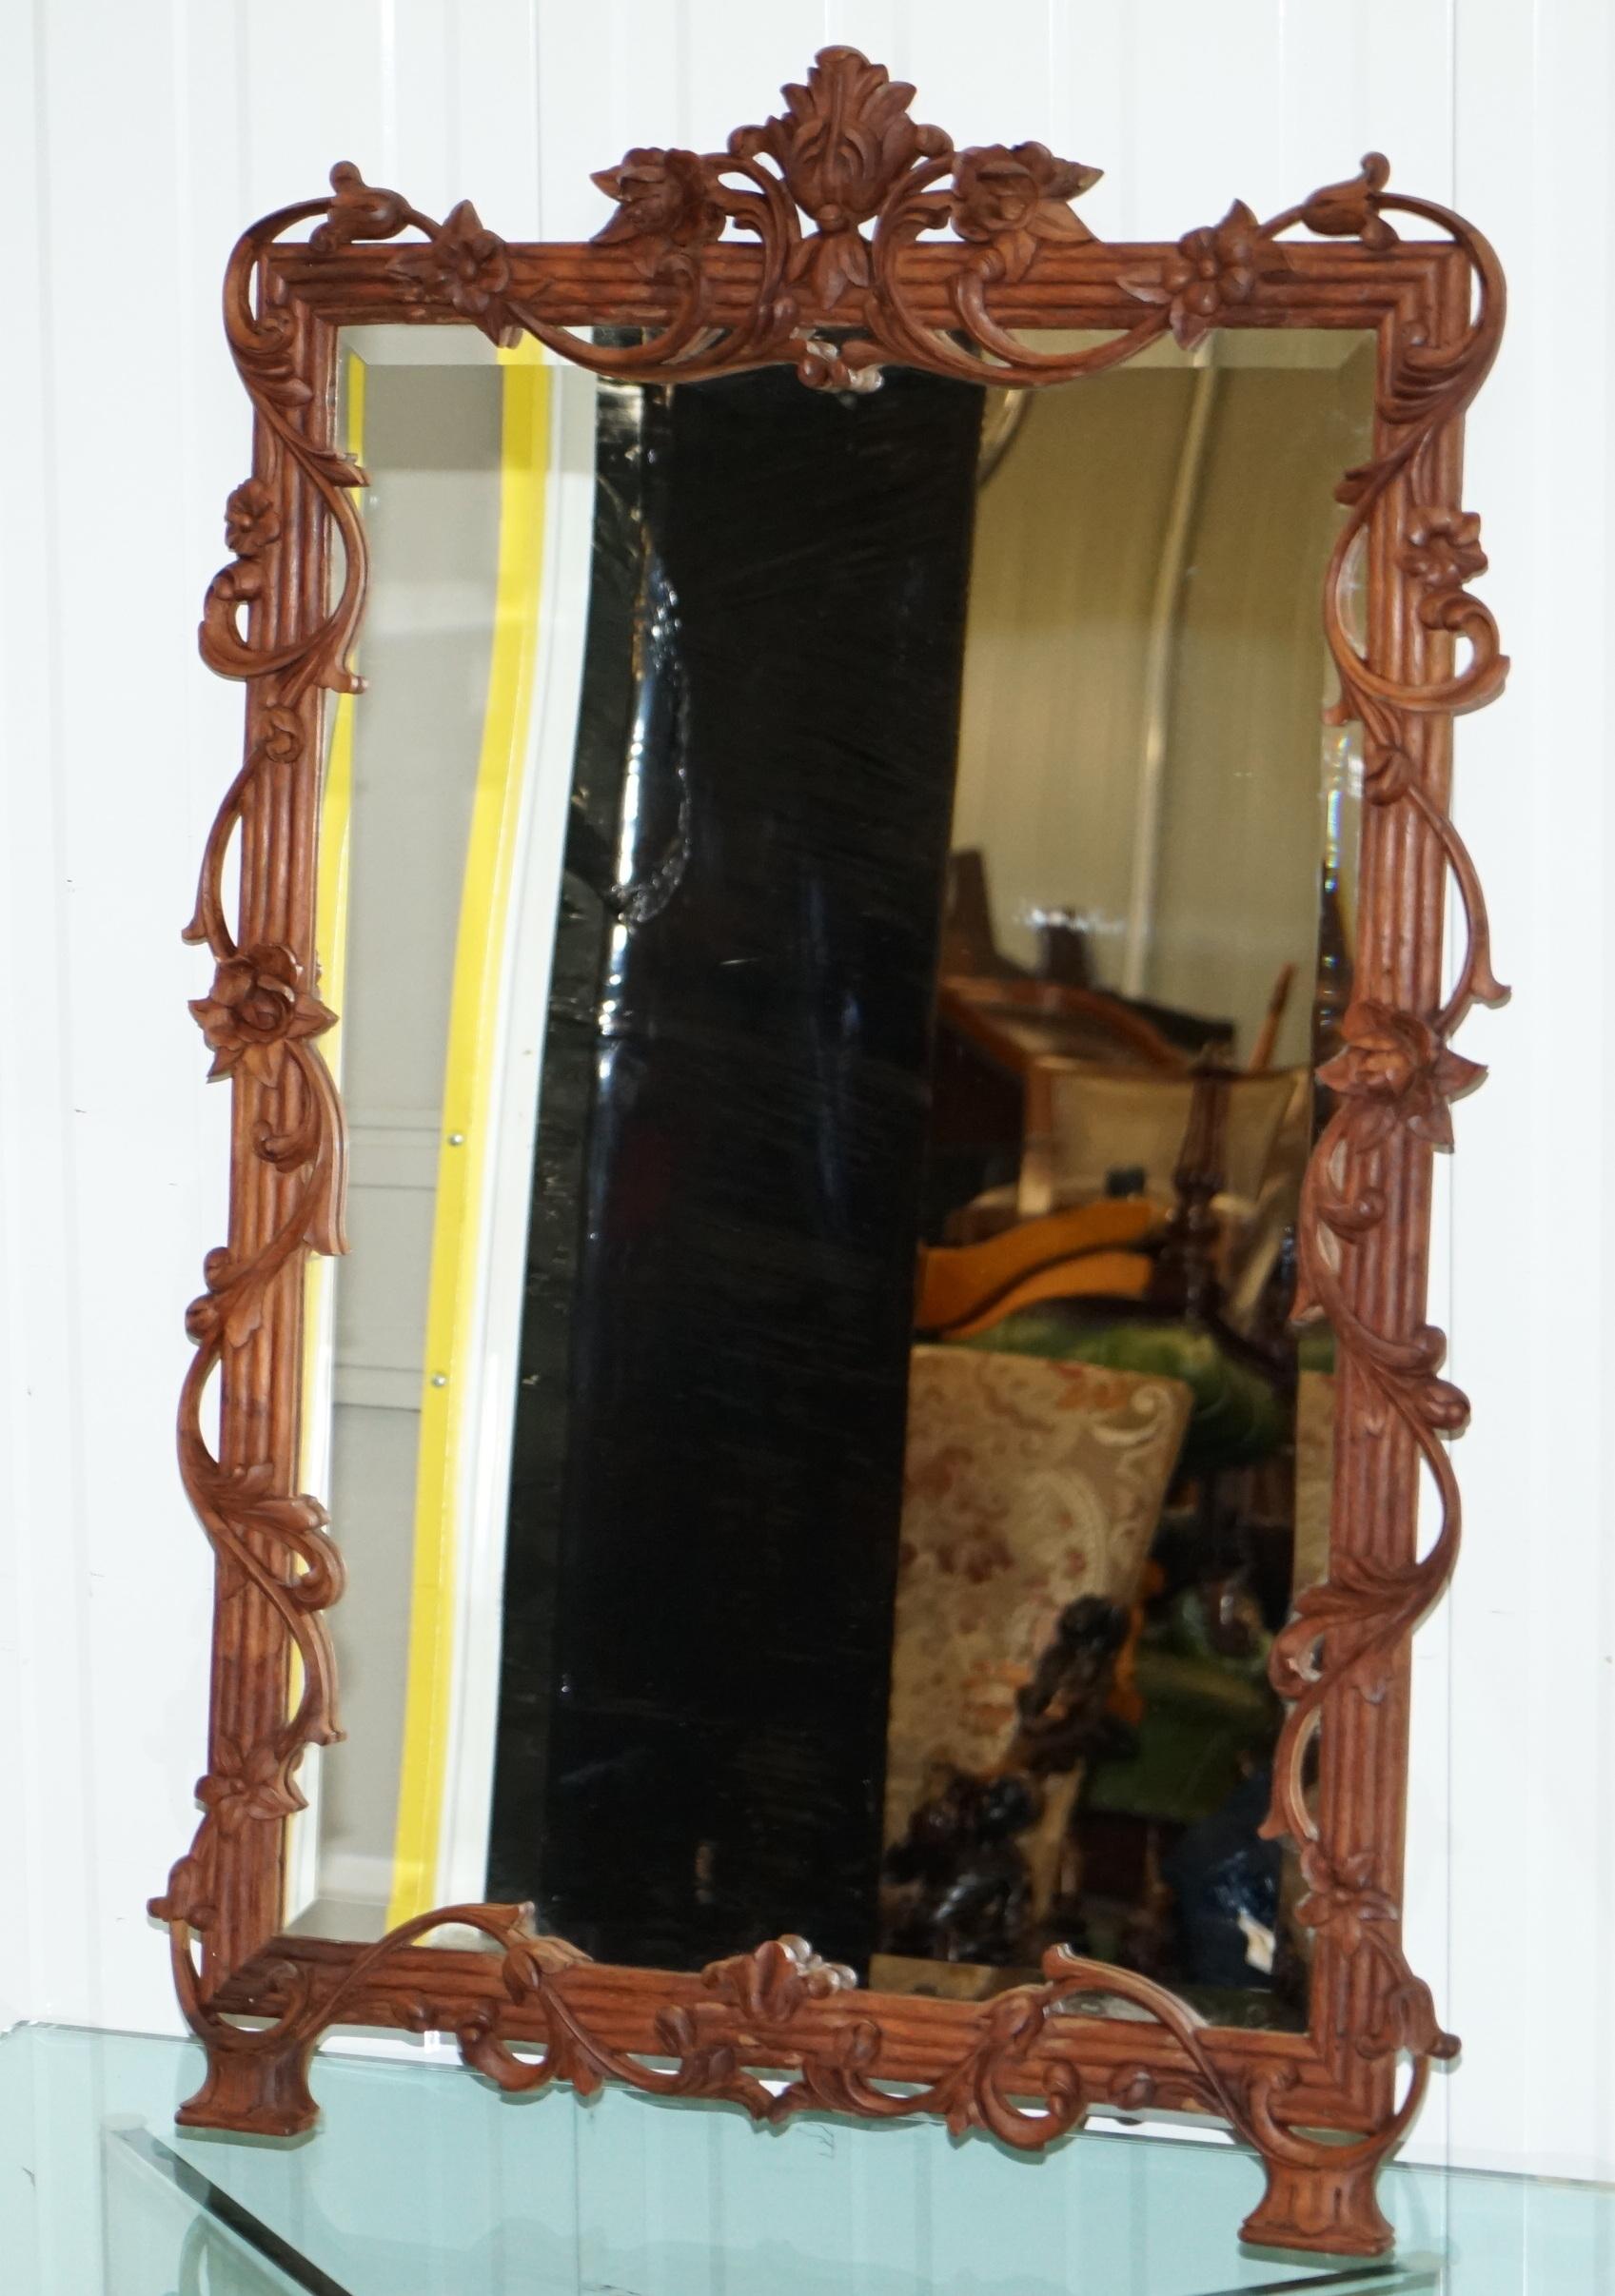 Wimbledon-Furniture is delighted to offer for sale this lovely hand carved with flowers and foliage large wall mirror with bevelled glass

A well made good looking and decorative piece, nicely carved and looking lovely from all angles

The glass is